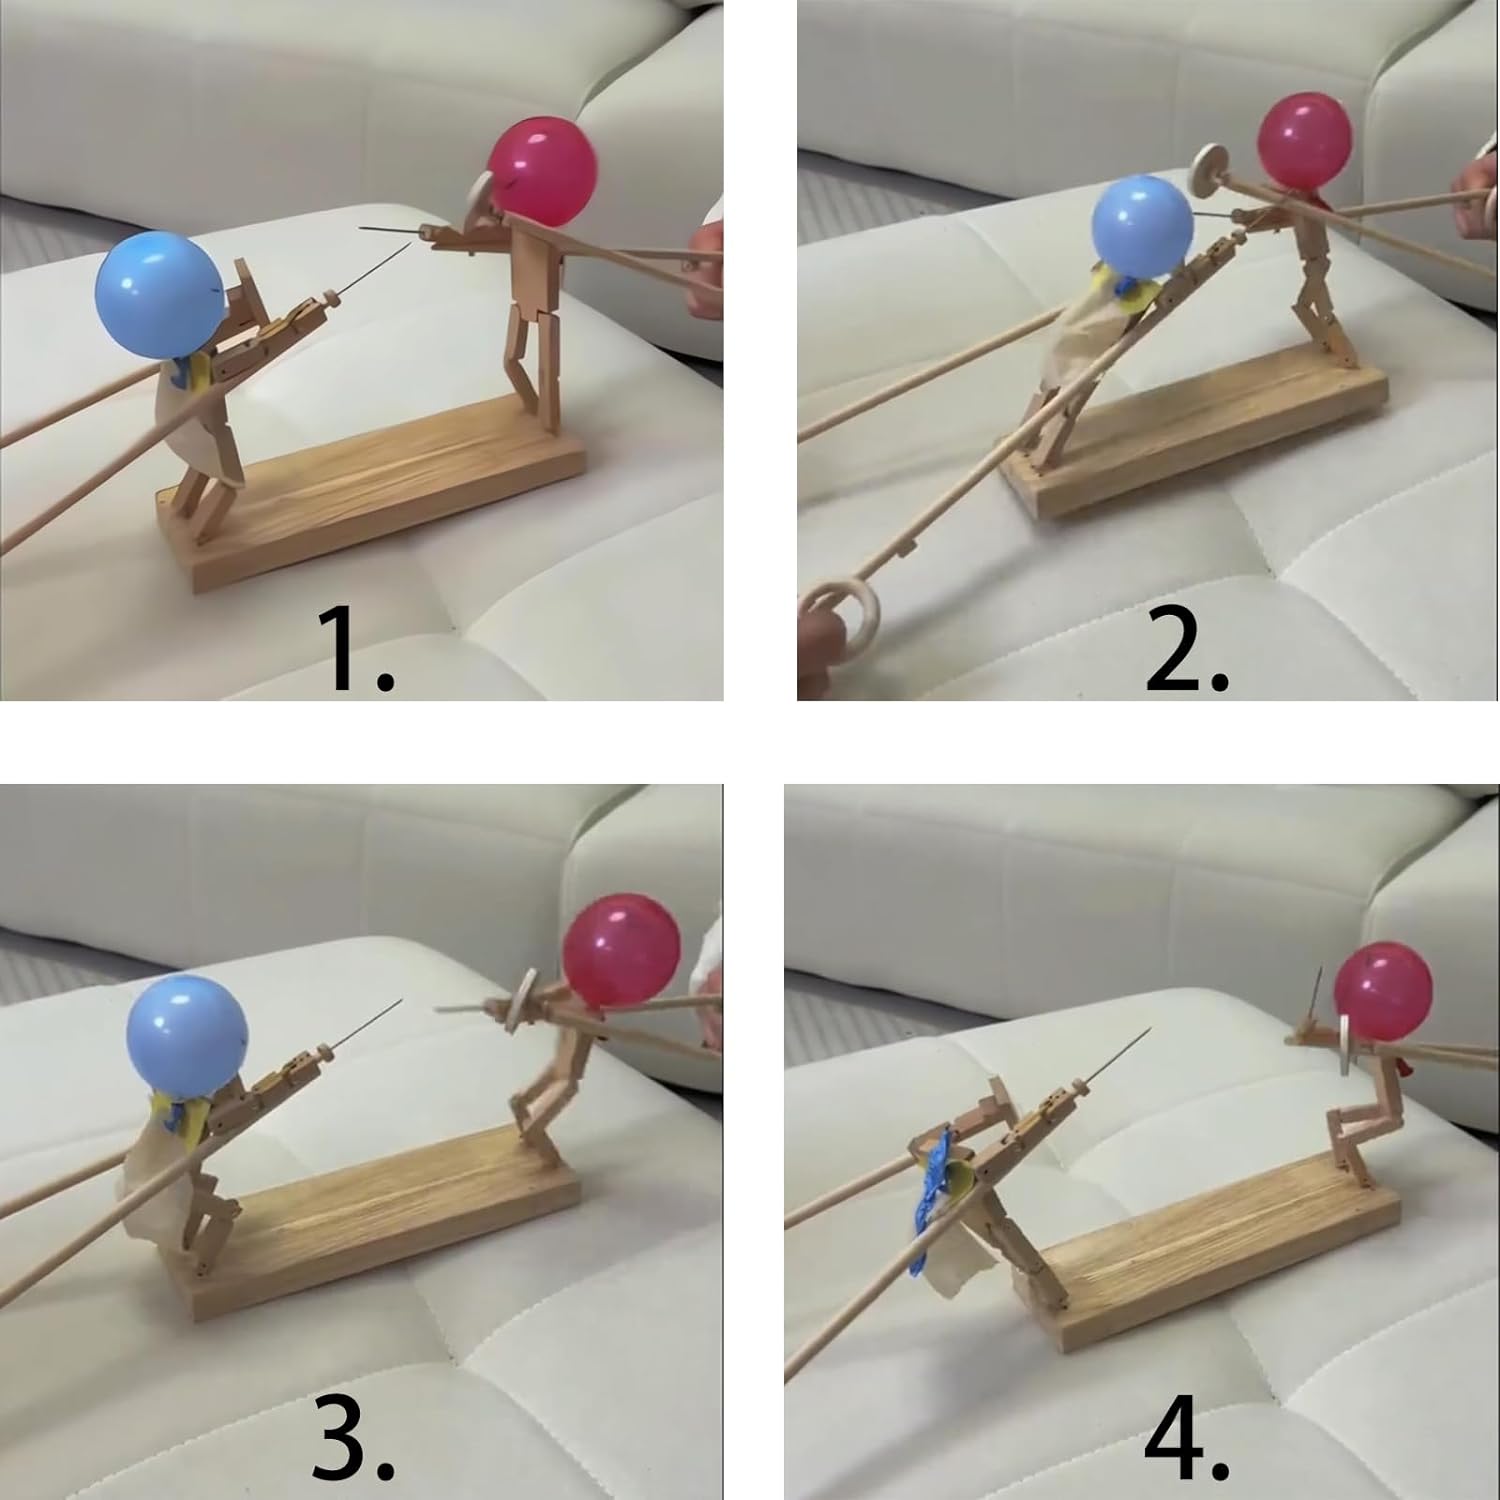 Balloon Bamboo Battle Game Control Strategy Fast-paced with Wooden